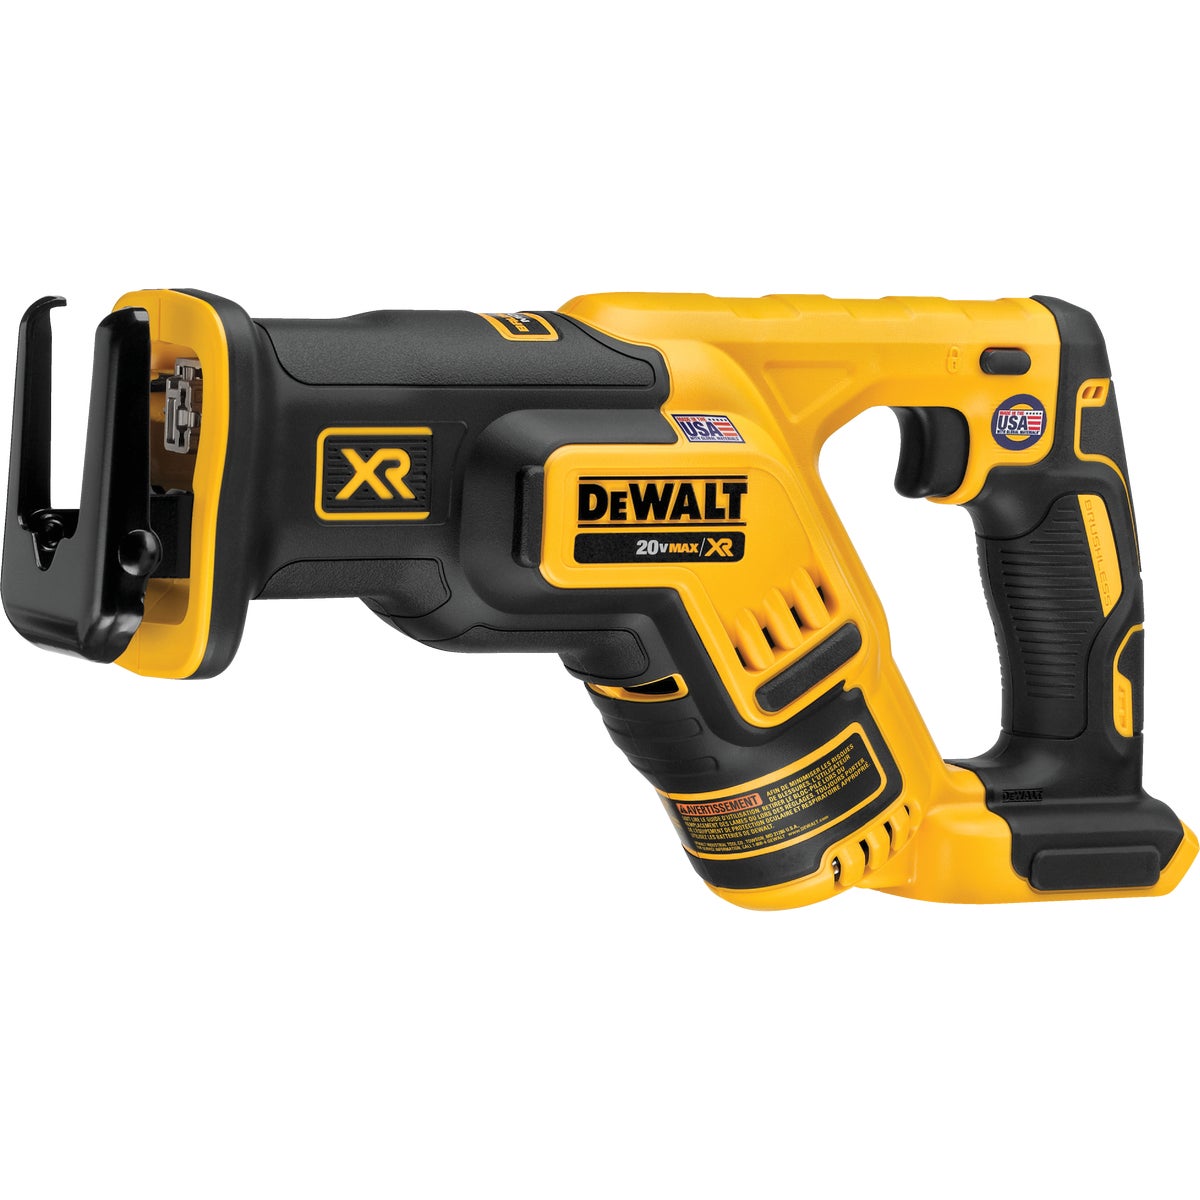 DEWALT 20 Volt MAX XR Lithium-Ion Brushless Cordless Reciprocating Saw (Tool Only)